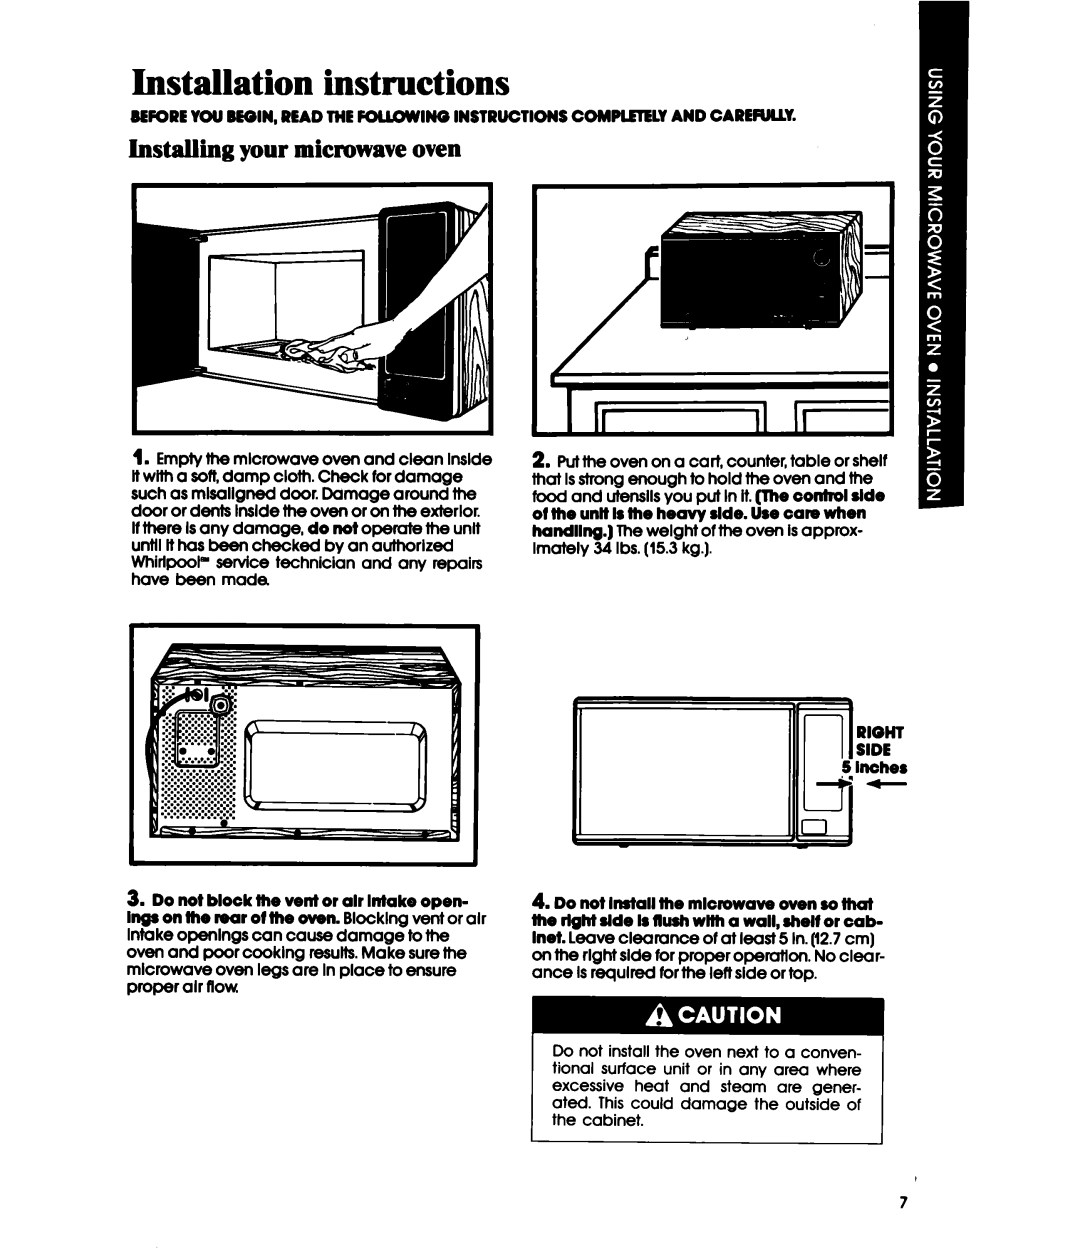 Whirlpool MW1200XW manual Installation instructions, Installing your microwave oven 